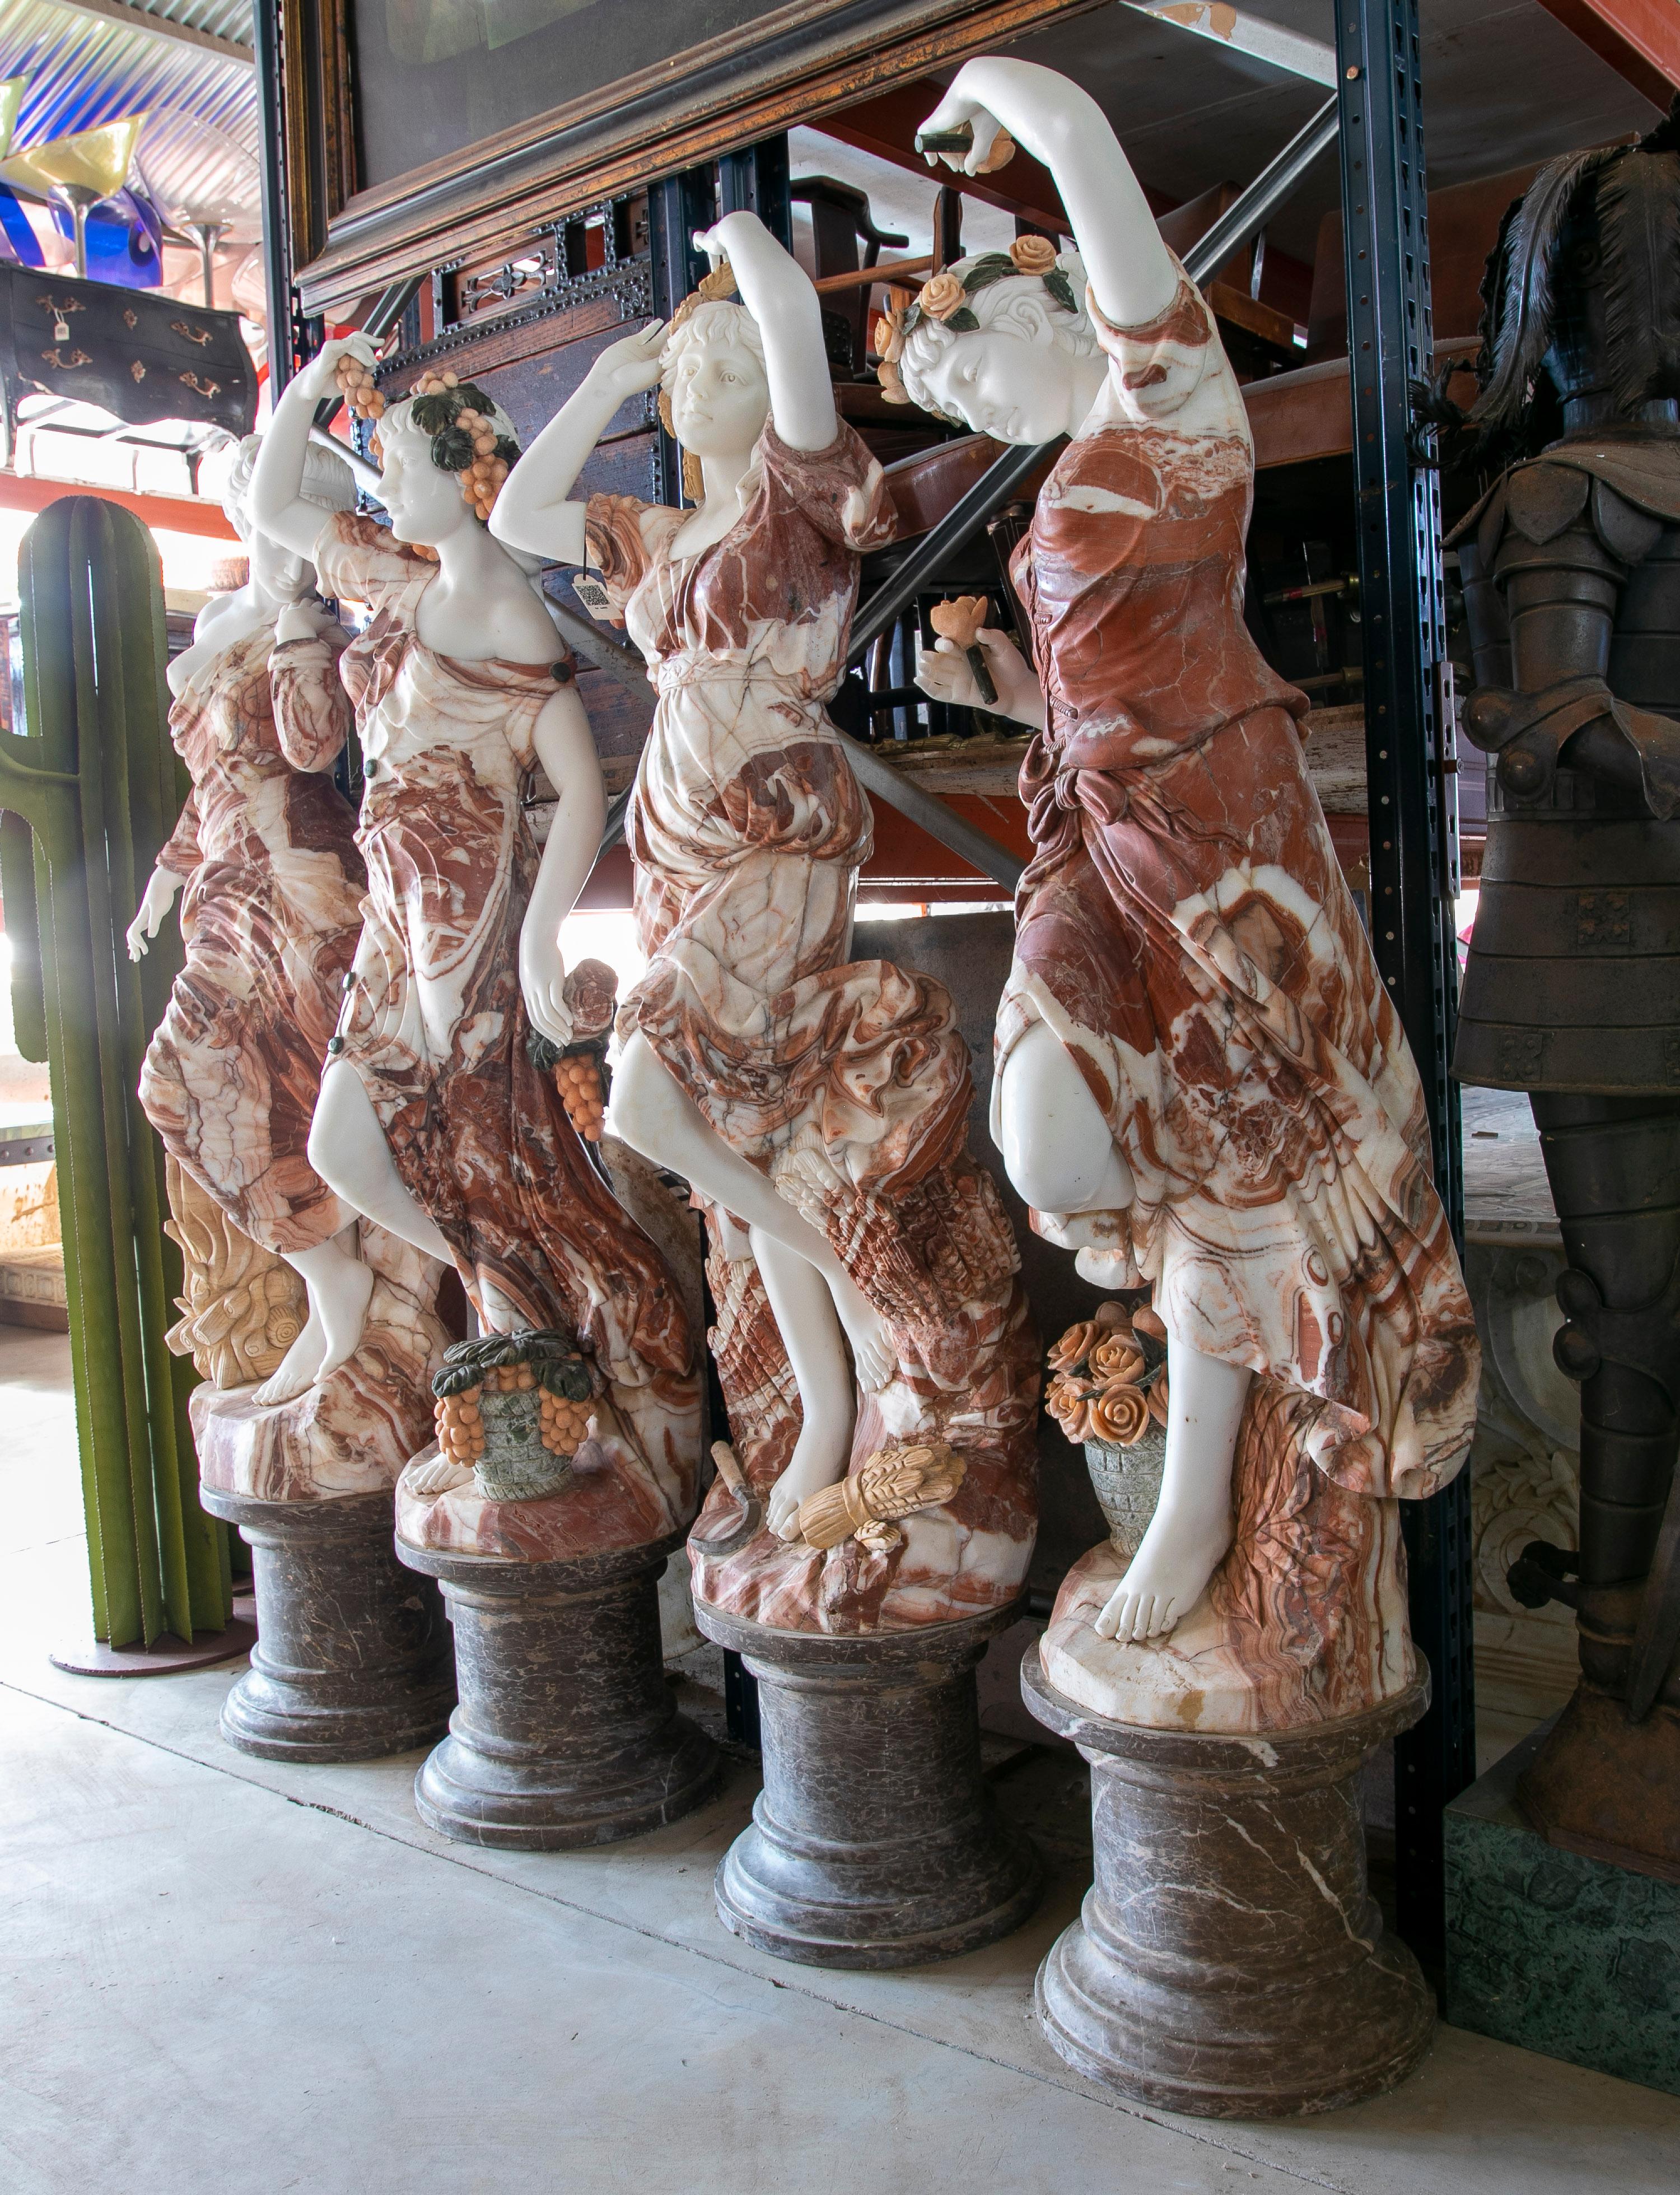 Classical 1990s European hand carved set of four seasons dancing with bases. Four woman statues carved out of mainly Alicante red, Carrara white and Emperador brown marble, with Serpentine green, Rosetta pink and Giallo yellow for the various